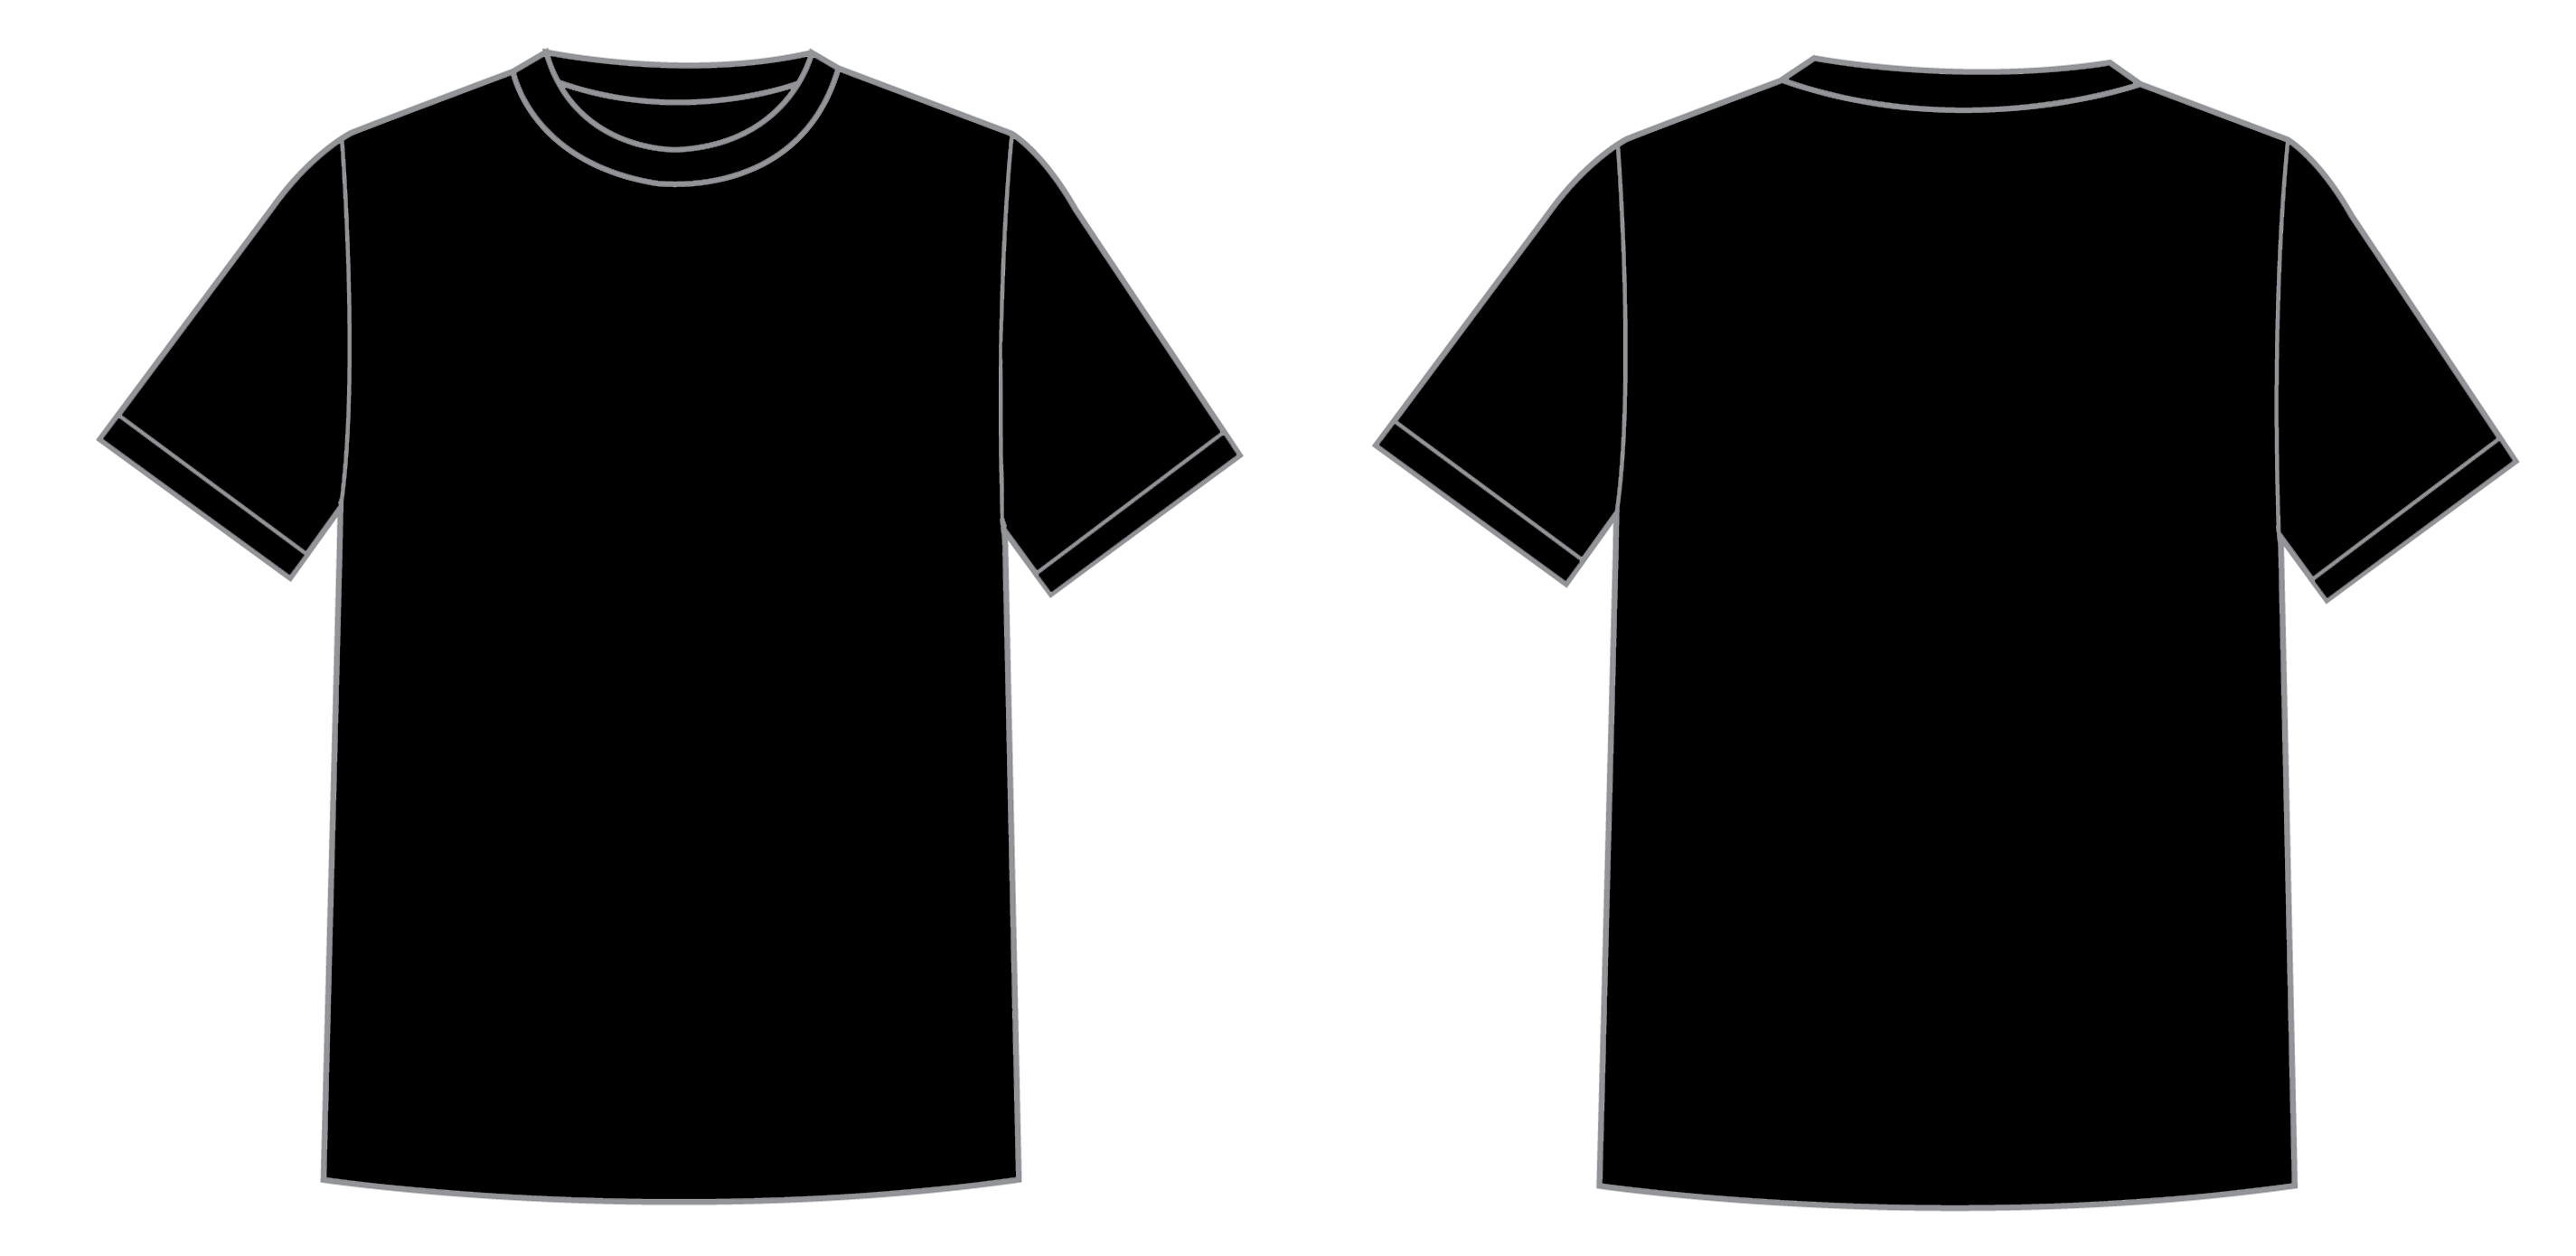 Black T Shirt Template - someiart